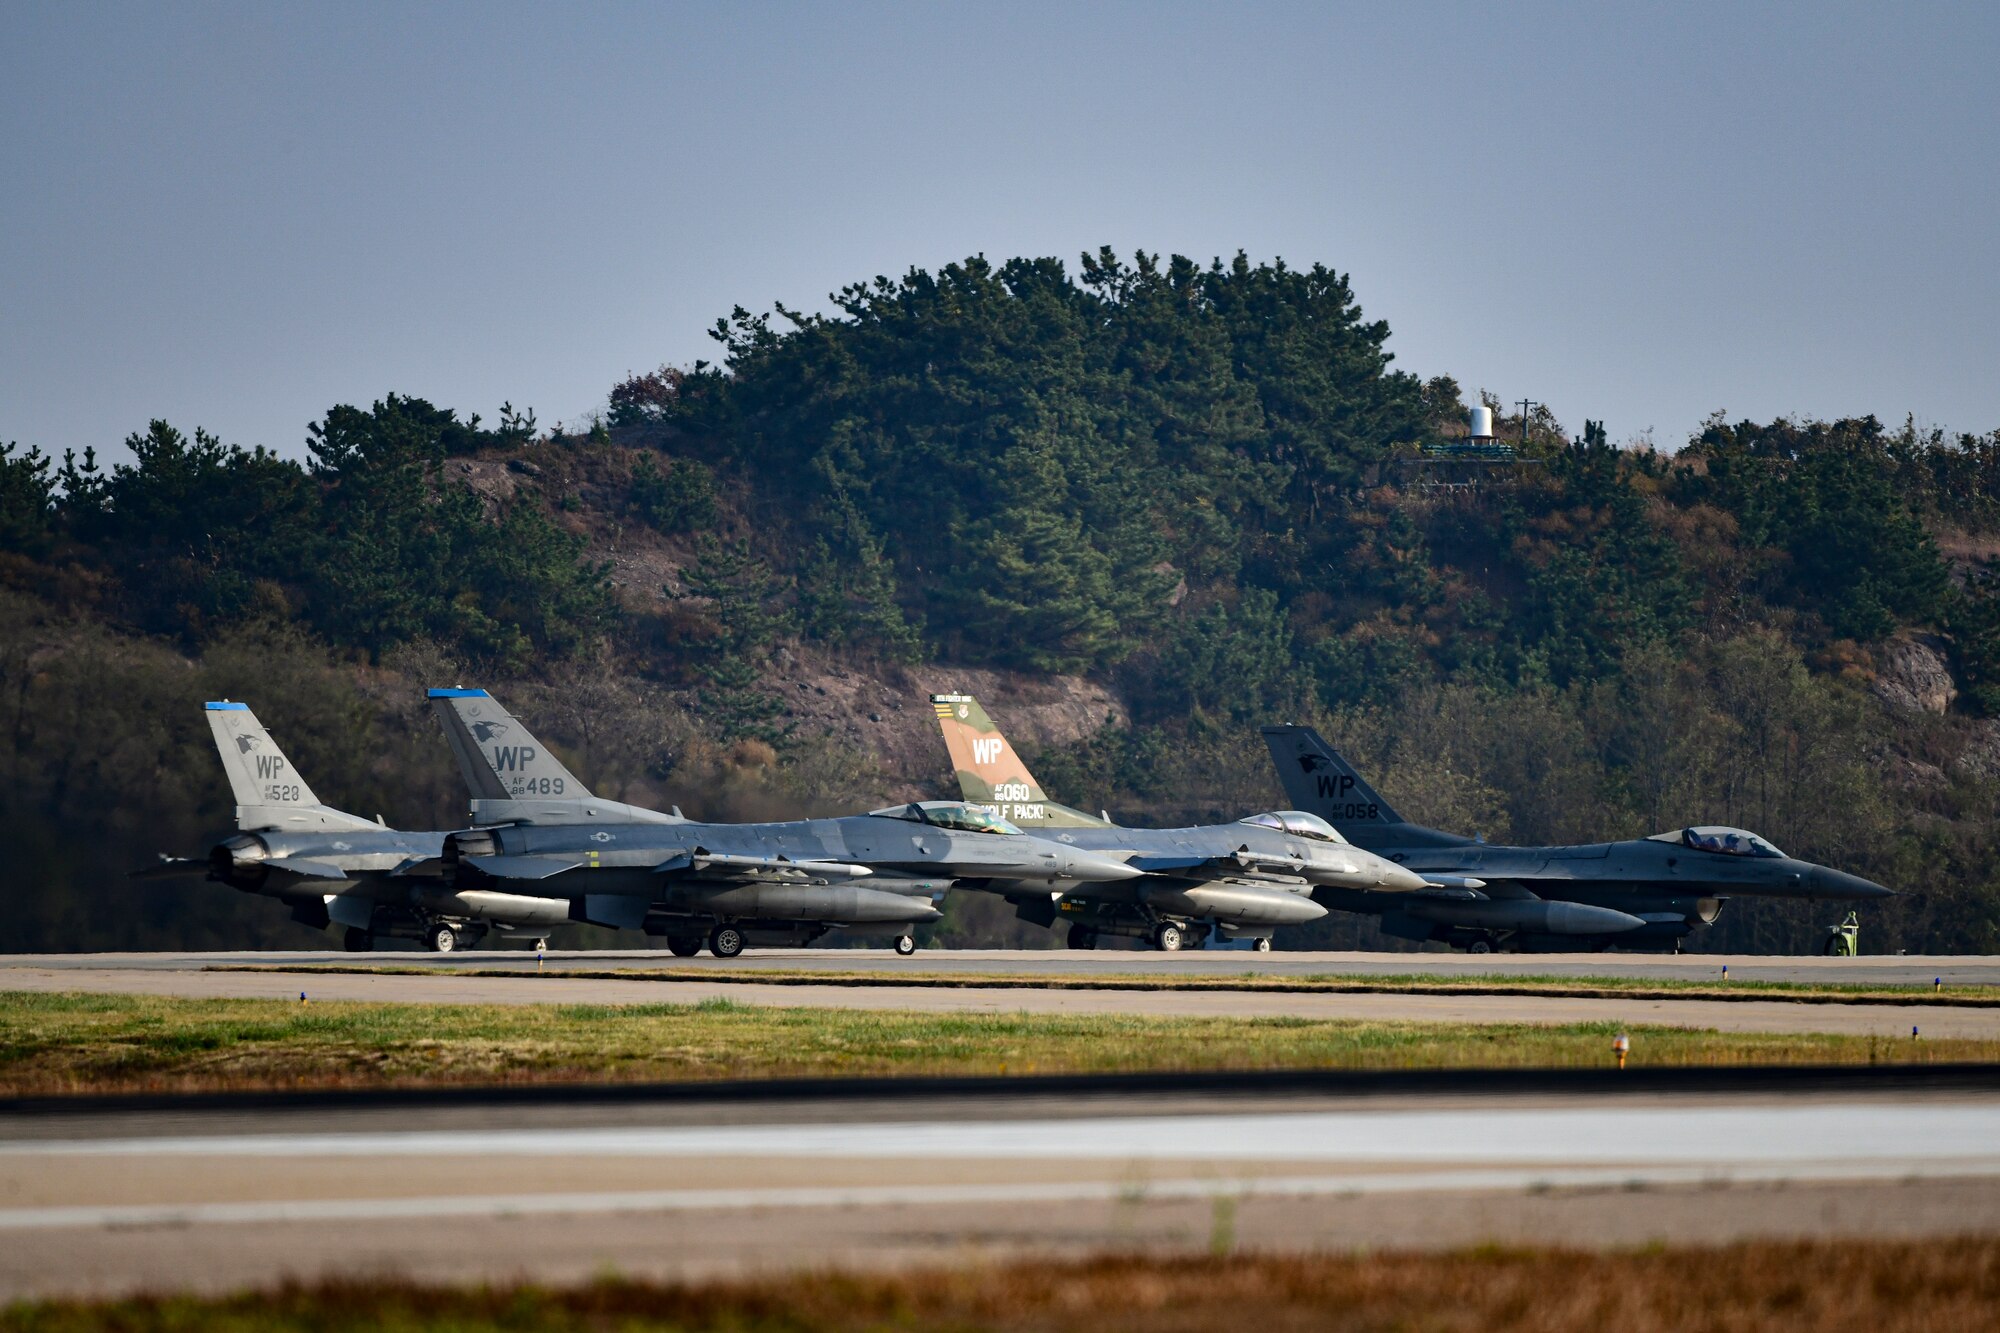 Fighter jets park on the runway.